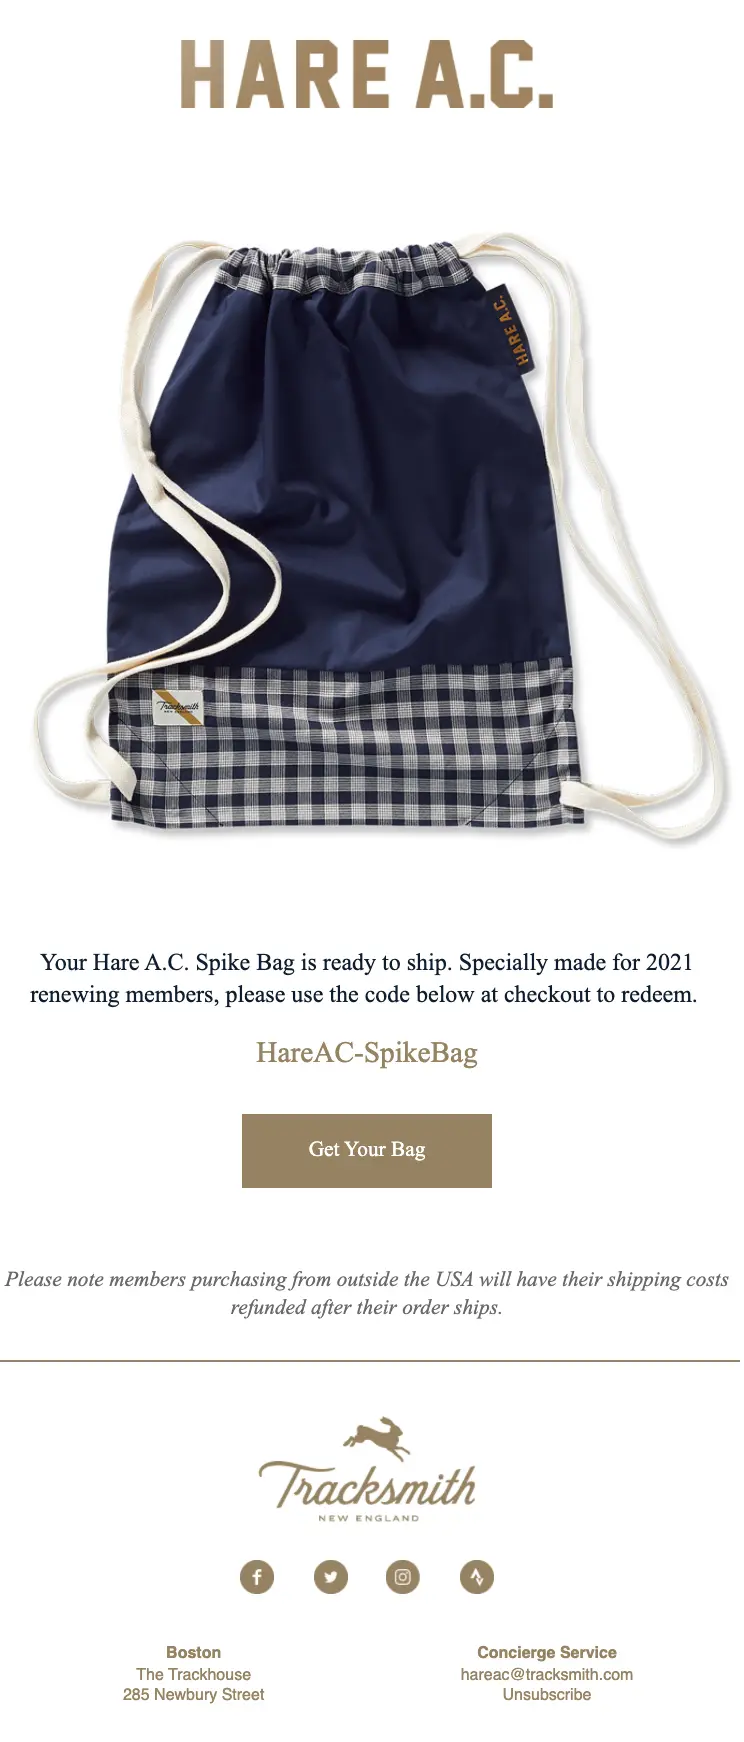 Tracksmith's email marketing campaign rewards customer loyalty and features a professionally photographed image of the spike bag in the email, so subscribers will see the quality of the bag before they place their order. The CTA is clear and direct, announcing a code for redemption along with a “Get Your Bag” button.